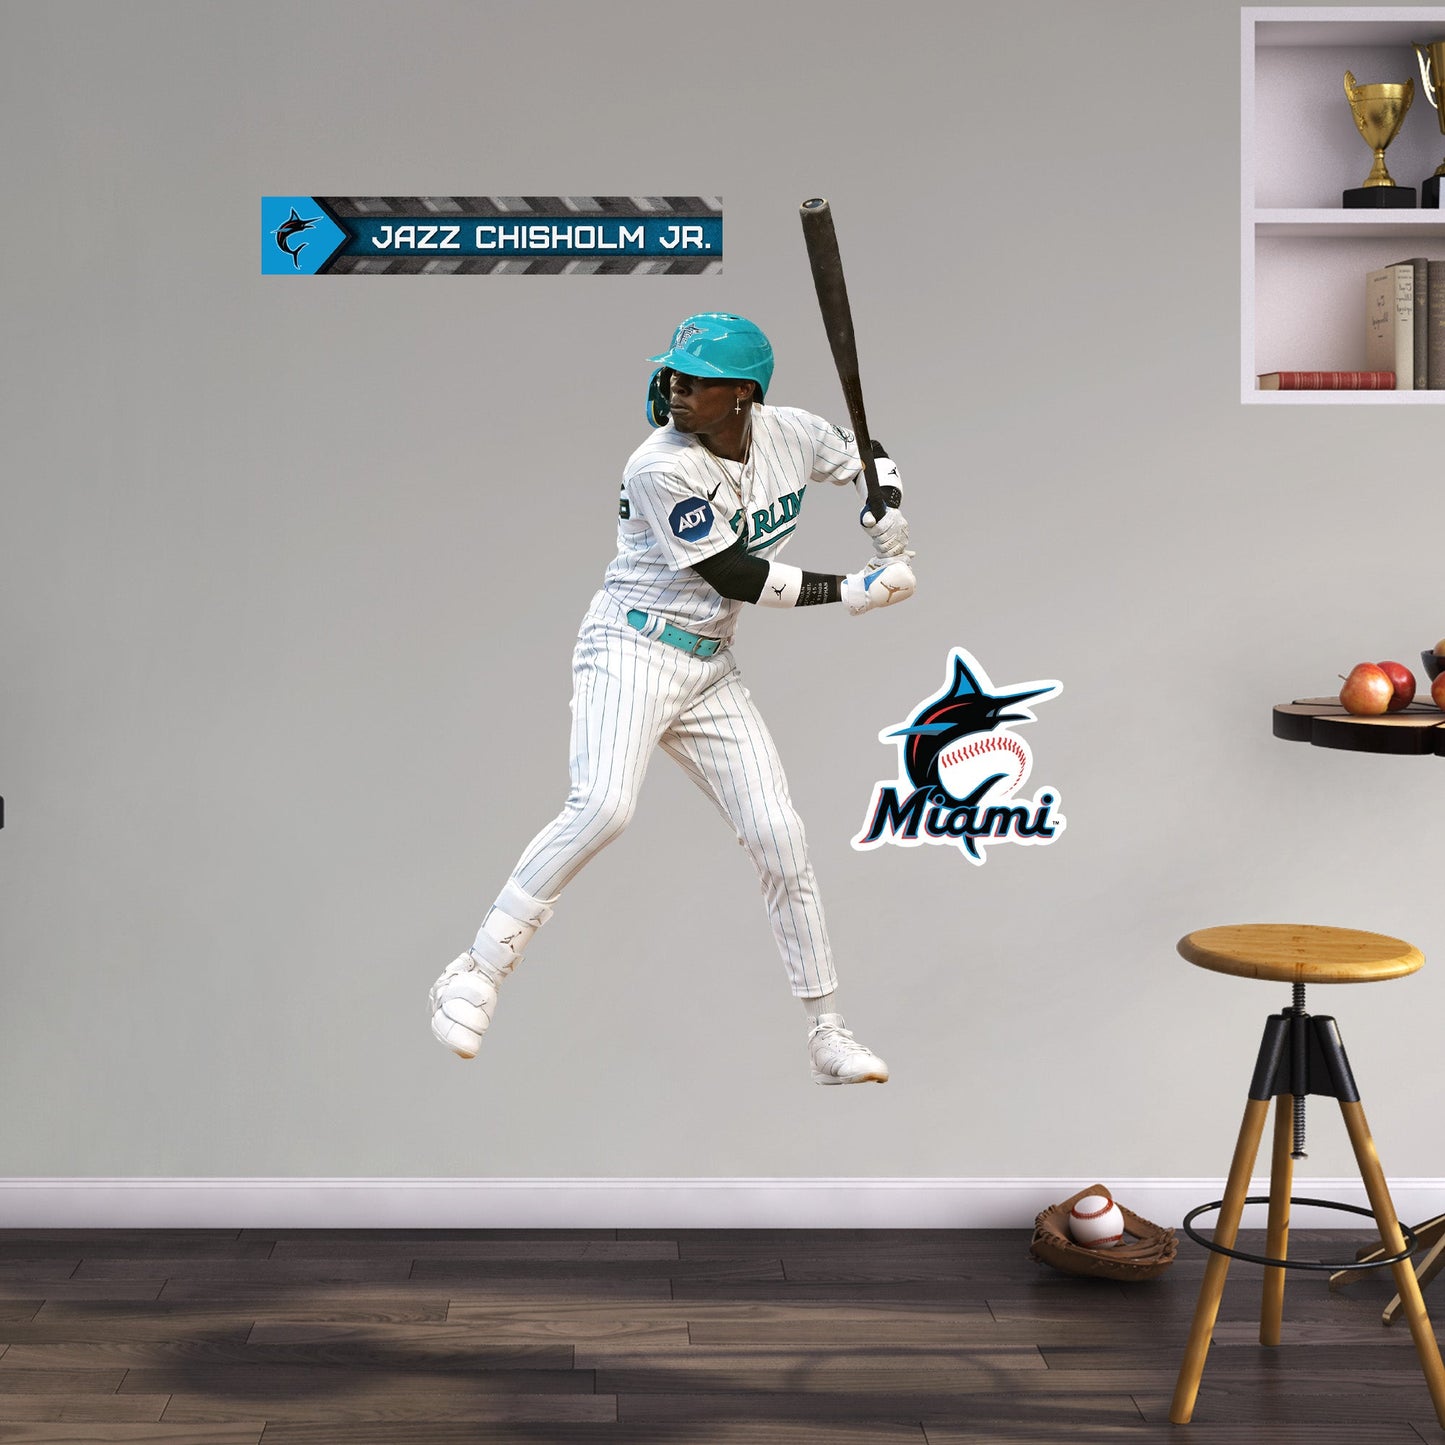 Miami Marlins: Jazz Chisholm Jr.  Throwback        - Officially Licensed MLB Removable     Adhesive Decal